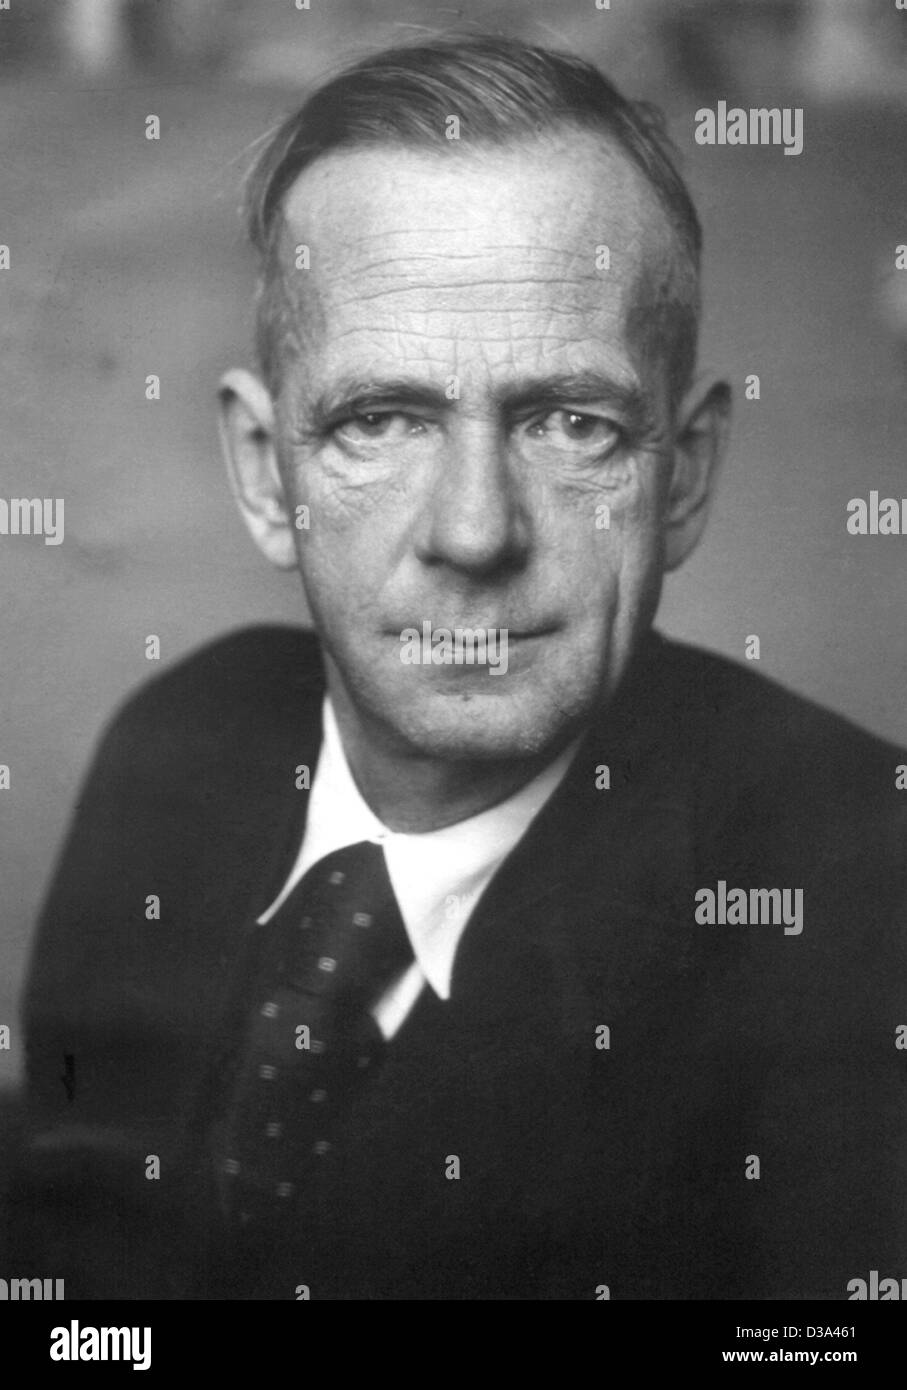 (dpa files) - Kurt Schumacher, chairman of the German Social Democratic party (SPD), poses for the photographer in 1946. Between the World Wars he was an editor. In May 1946 he was elected as the first chairman of the SPD. During the World War I Schumacher lost his arm and in 1948 his leg was ampute Stock Photo